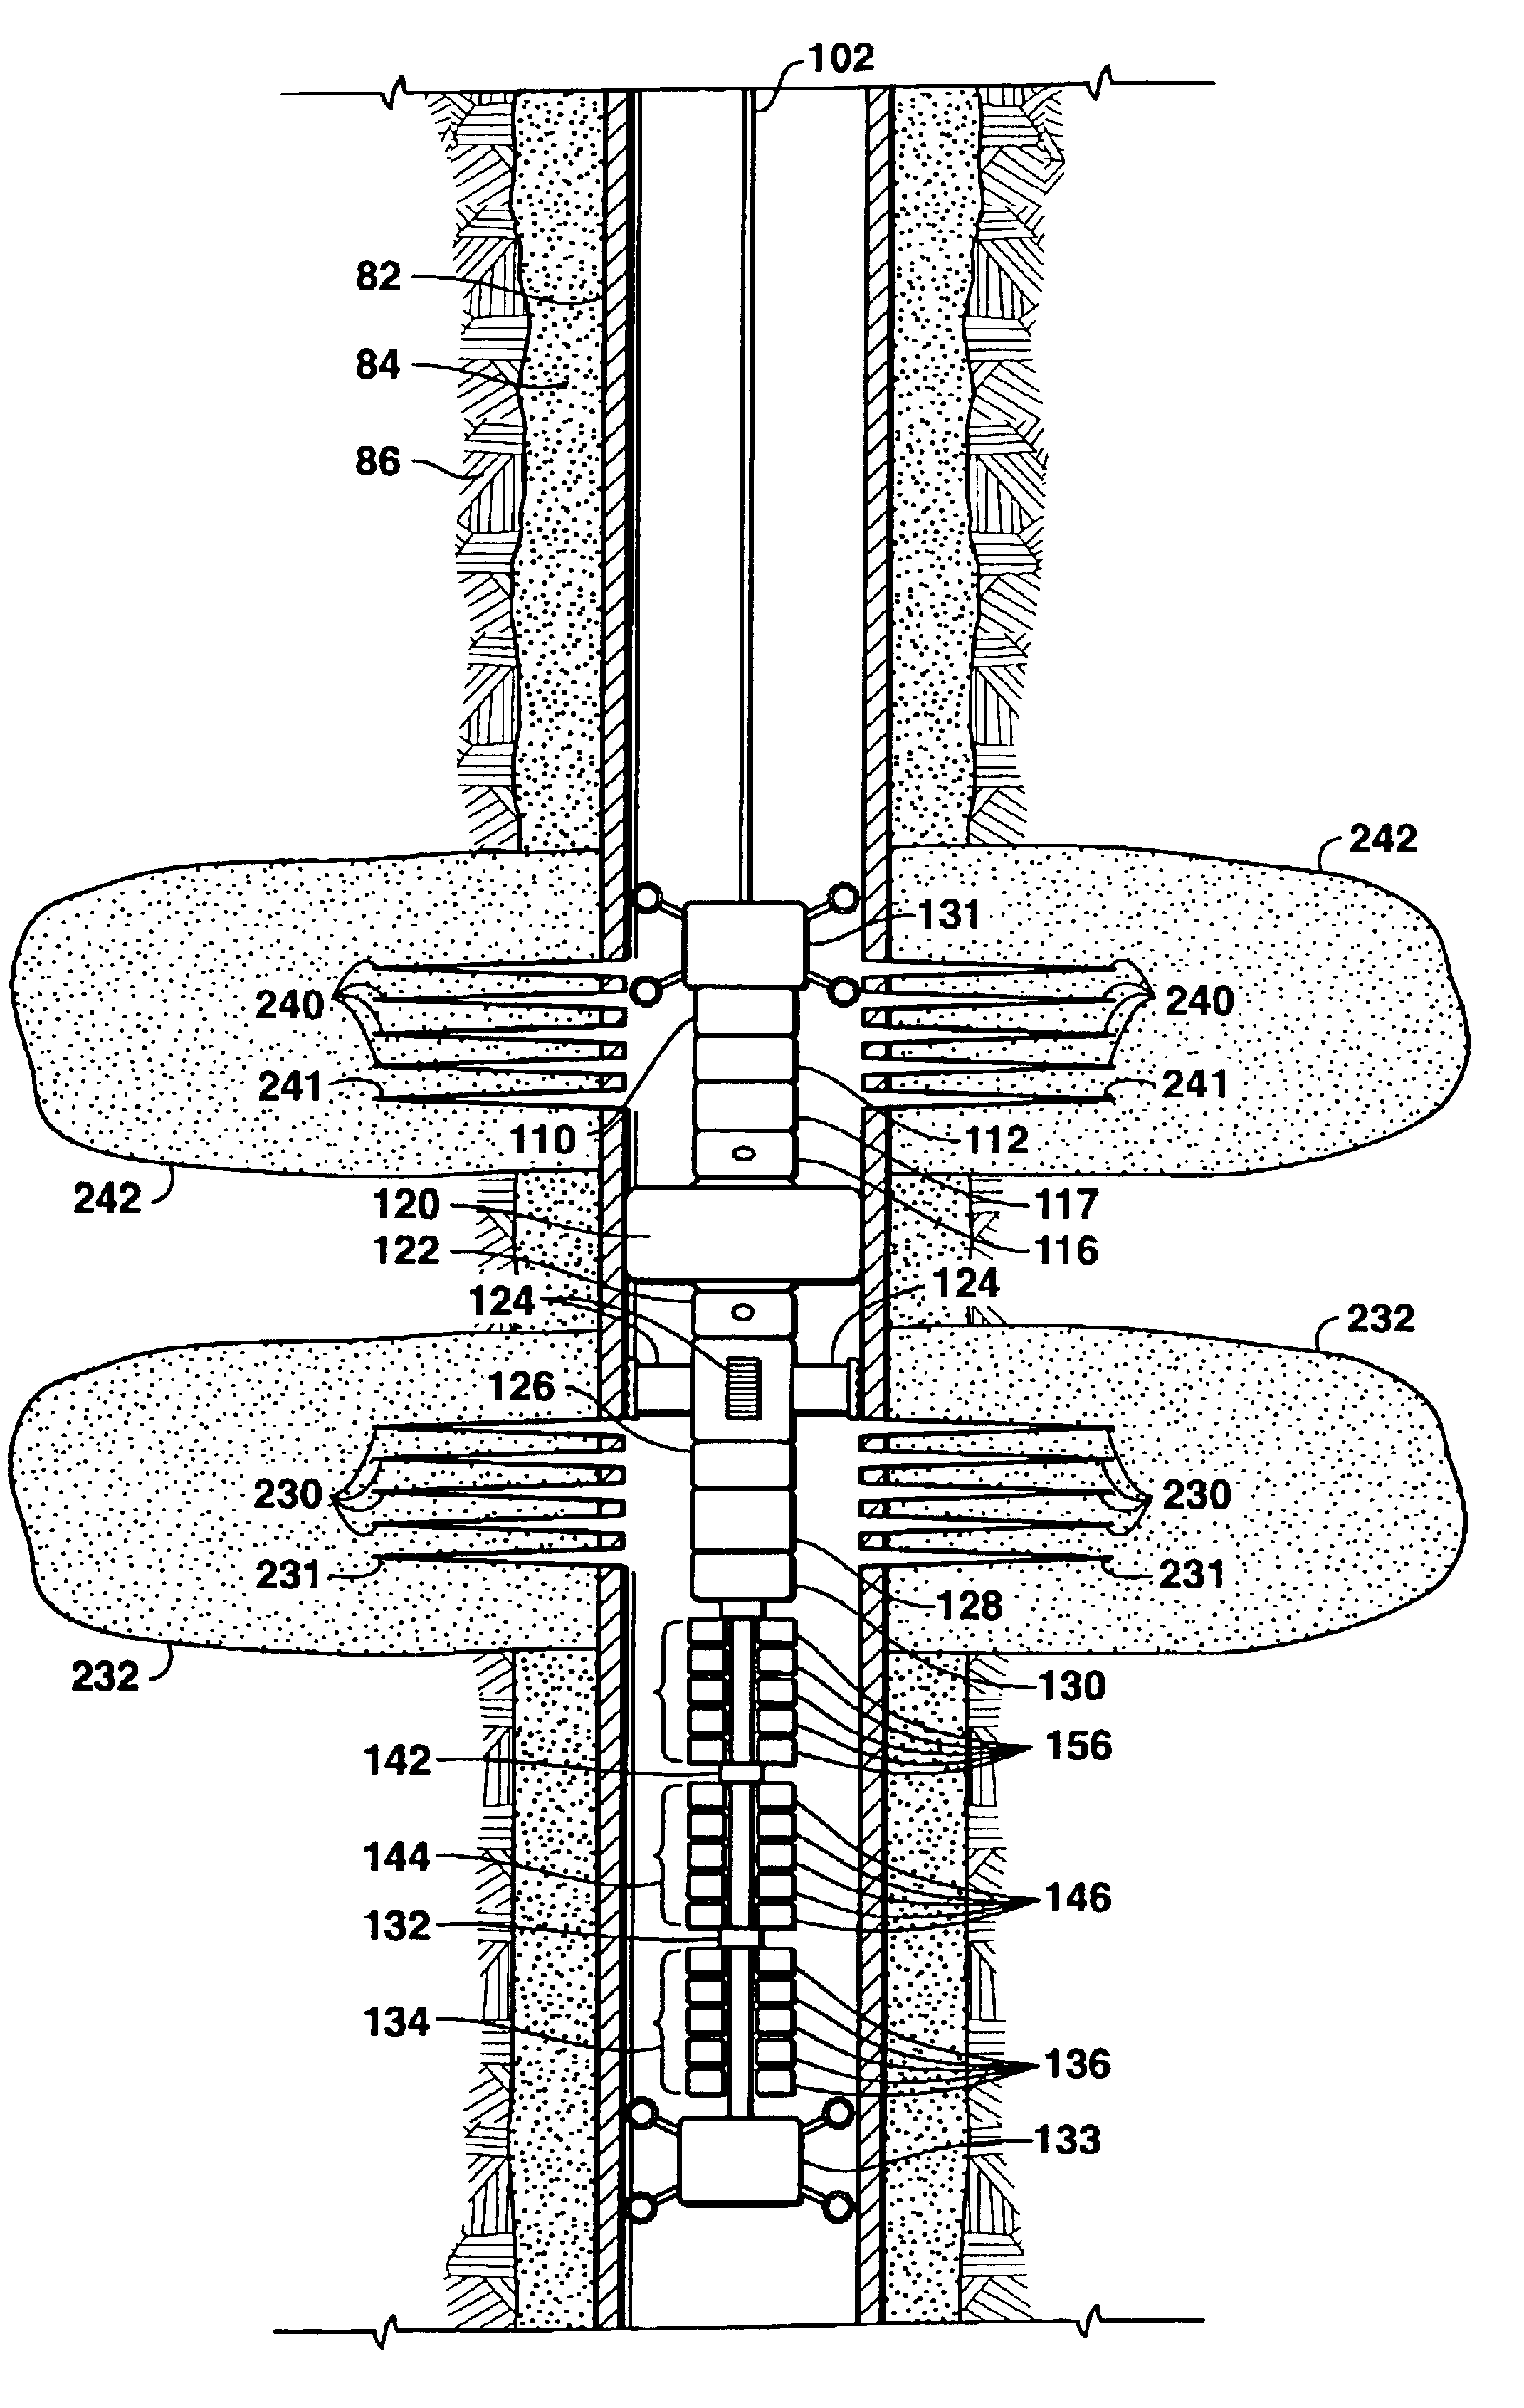 Method and apparatus for stimulation of multiple formation intervals